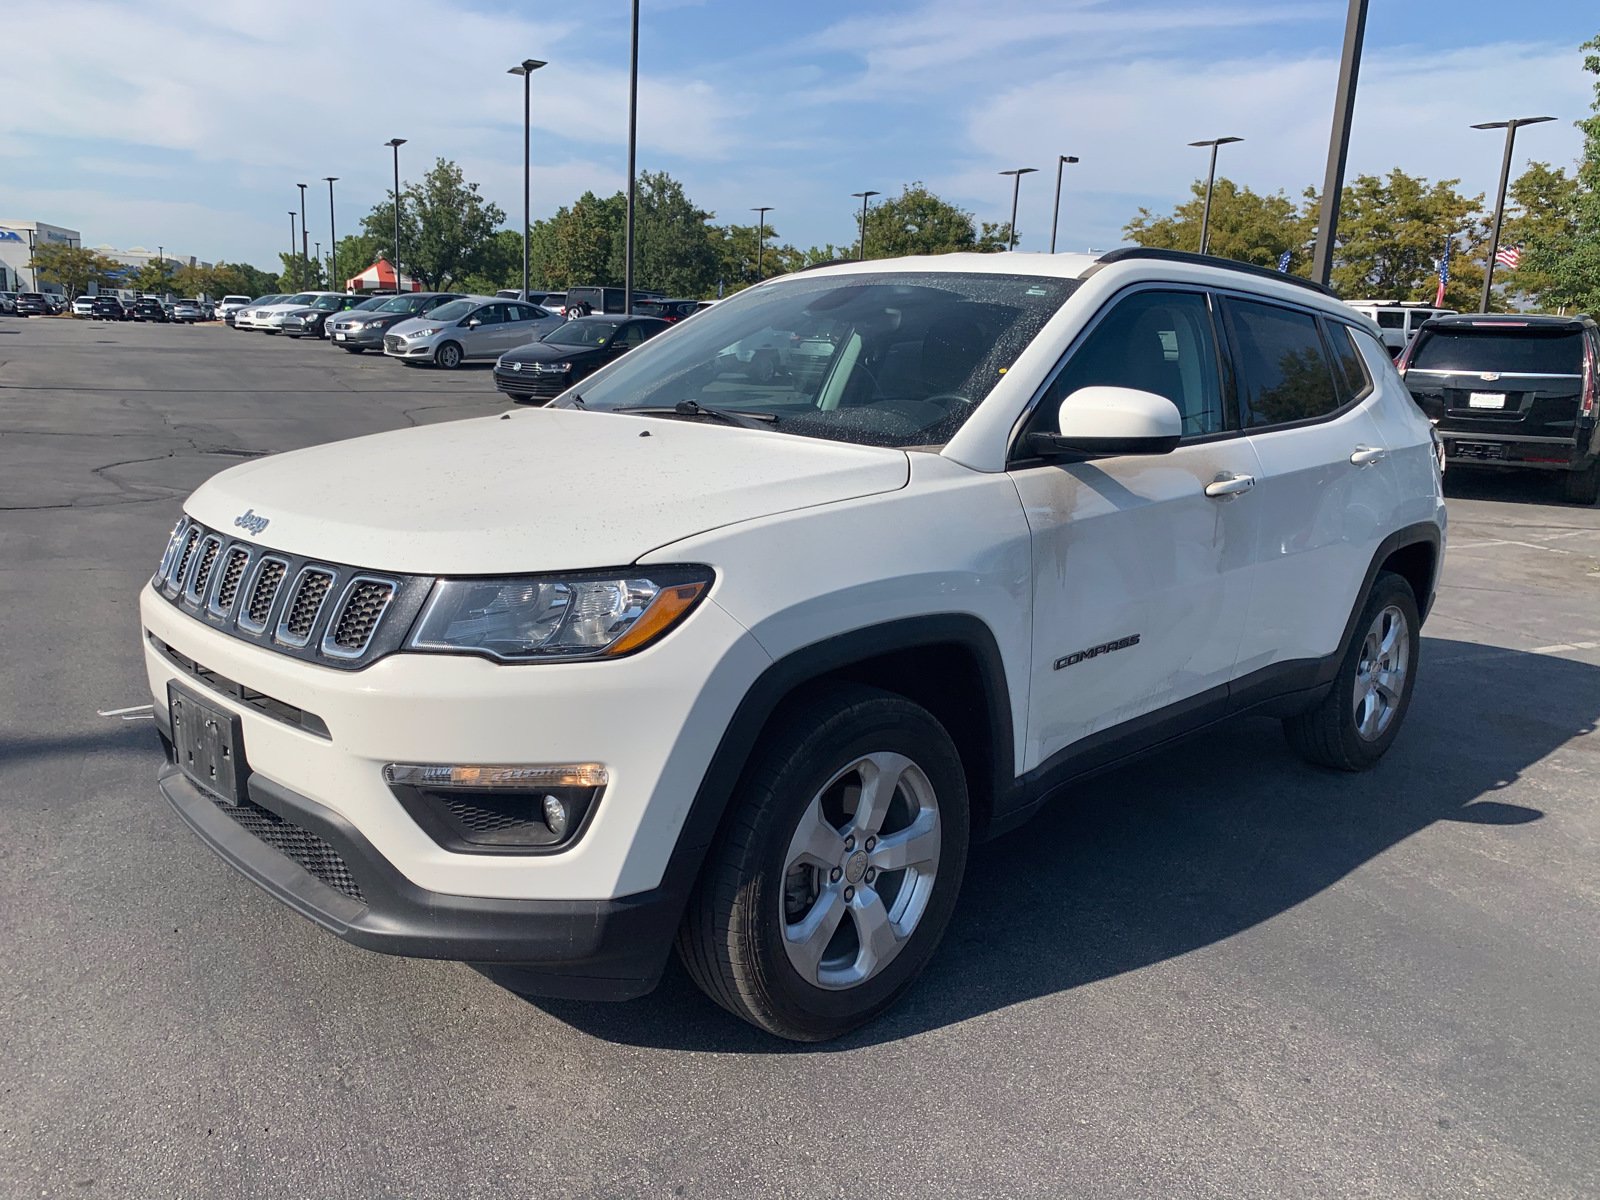 Pre-Owned 2017 Jeep Compass Latitude Sport Utility in Sandy #N1952 3C4NJDBB4HT660355 | Larry H 2017 Jeep Compass Tire Size P225 60r17